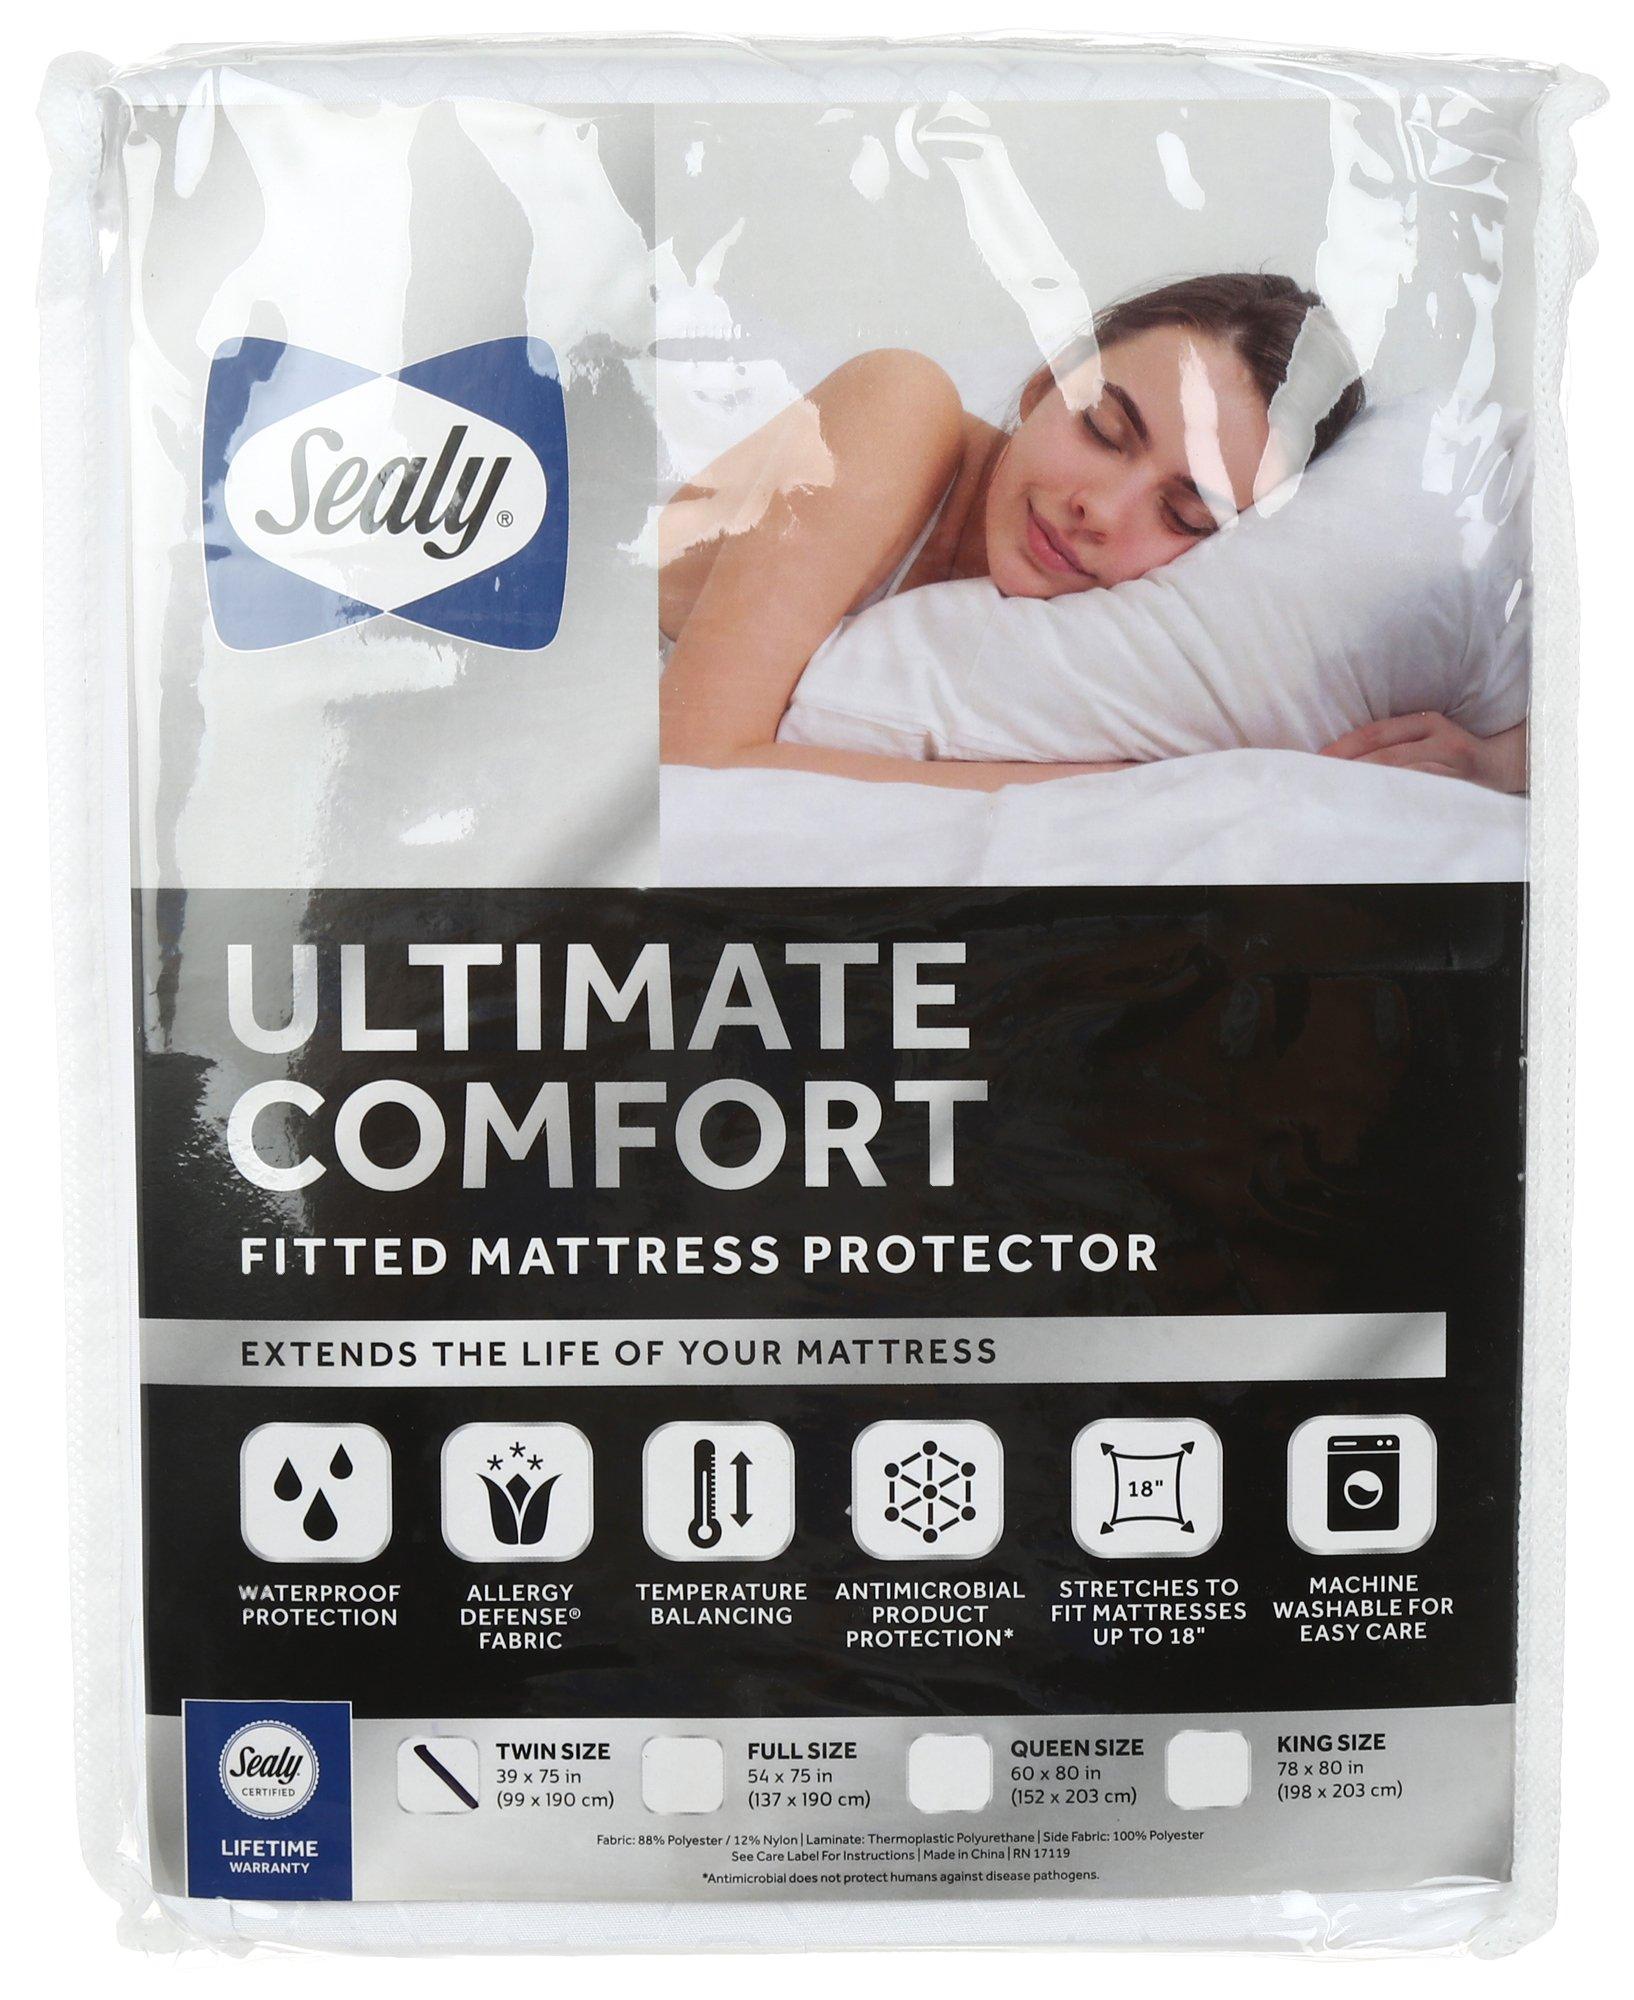 Twin Sized Fitted Mattress Protector